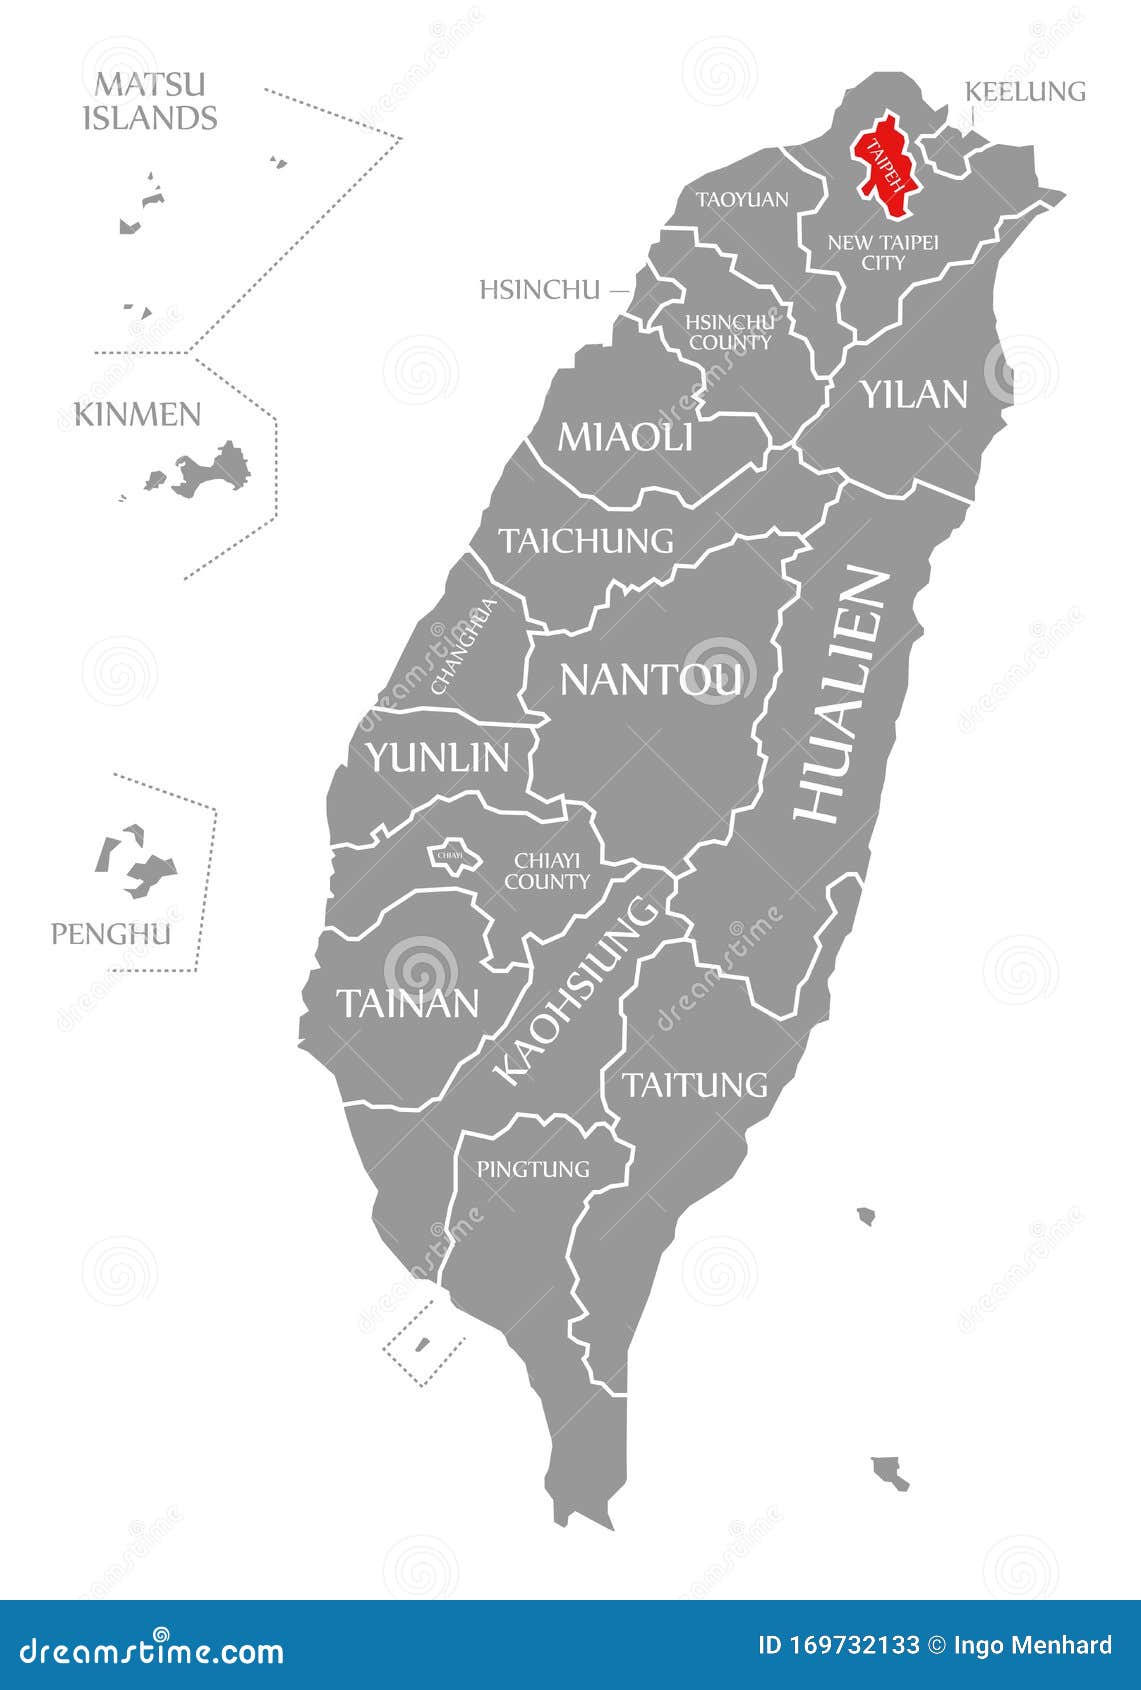 taipeh red highlighted in map of taiwan